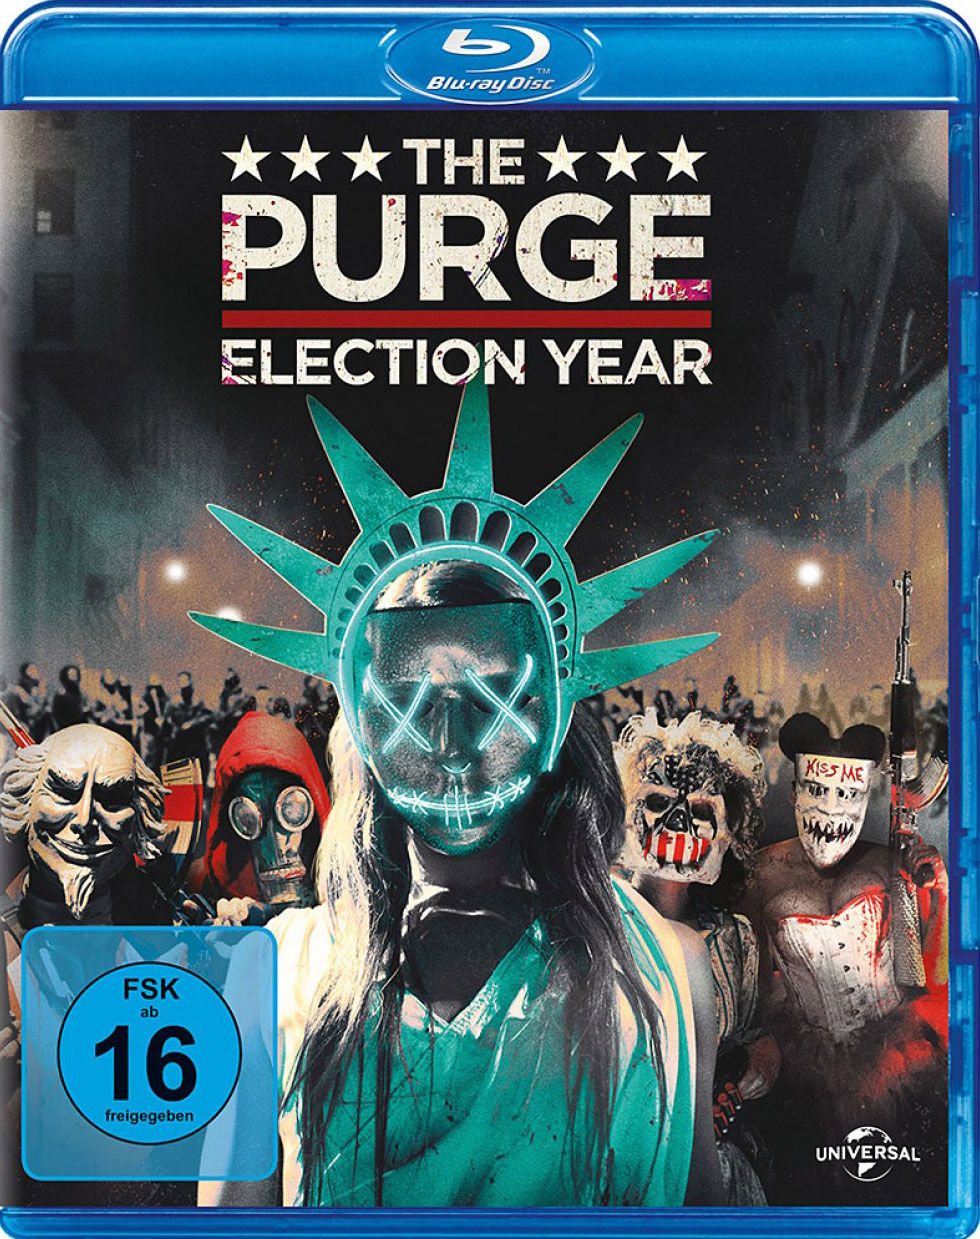 Purge, The - Election Year (BLURAY)